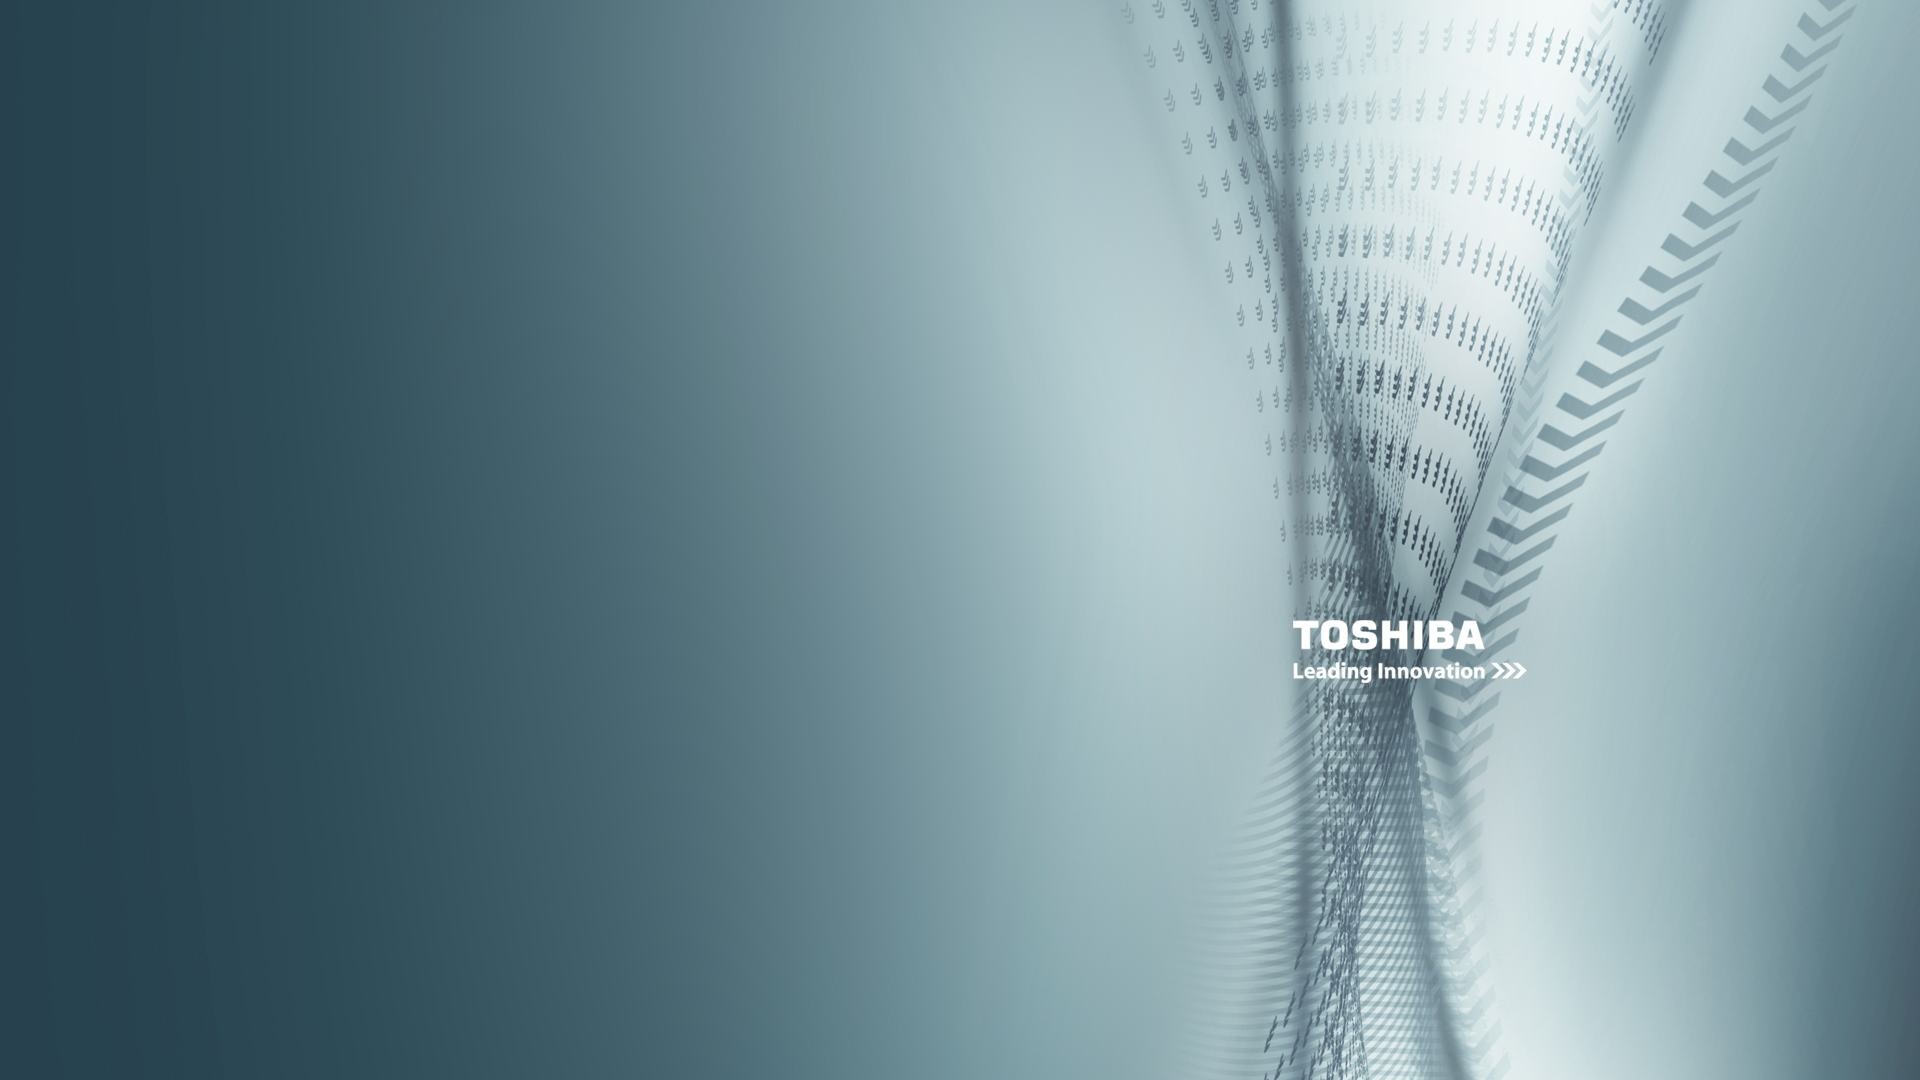 1920x1080 Wallpapers Backgrounds - Toshiba Wallpapers Blu ray Movies